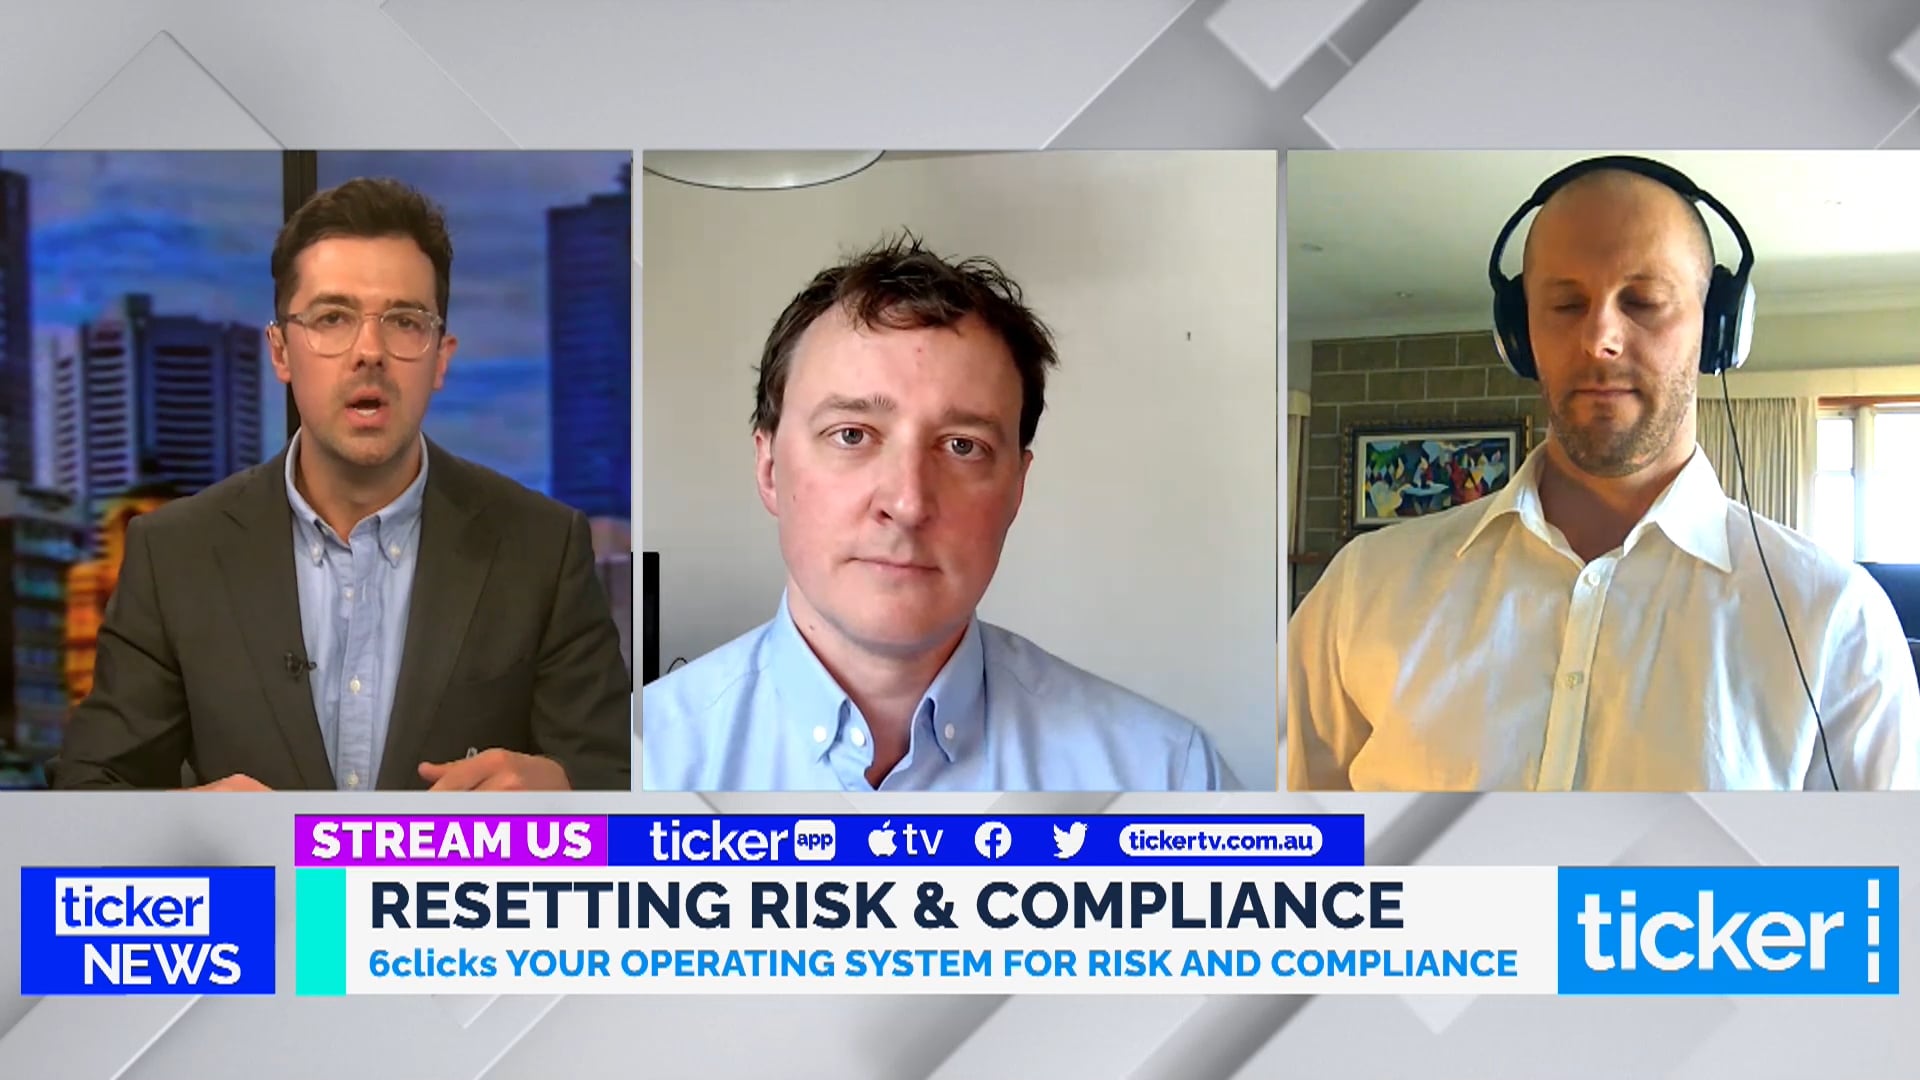 Resetting Risk & Compliance